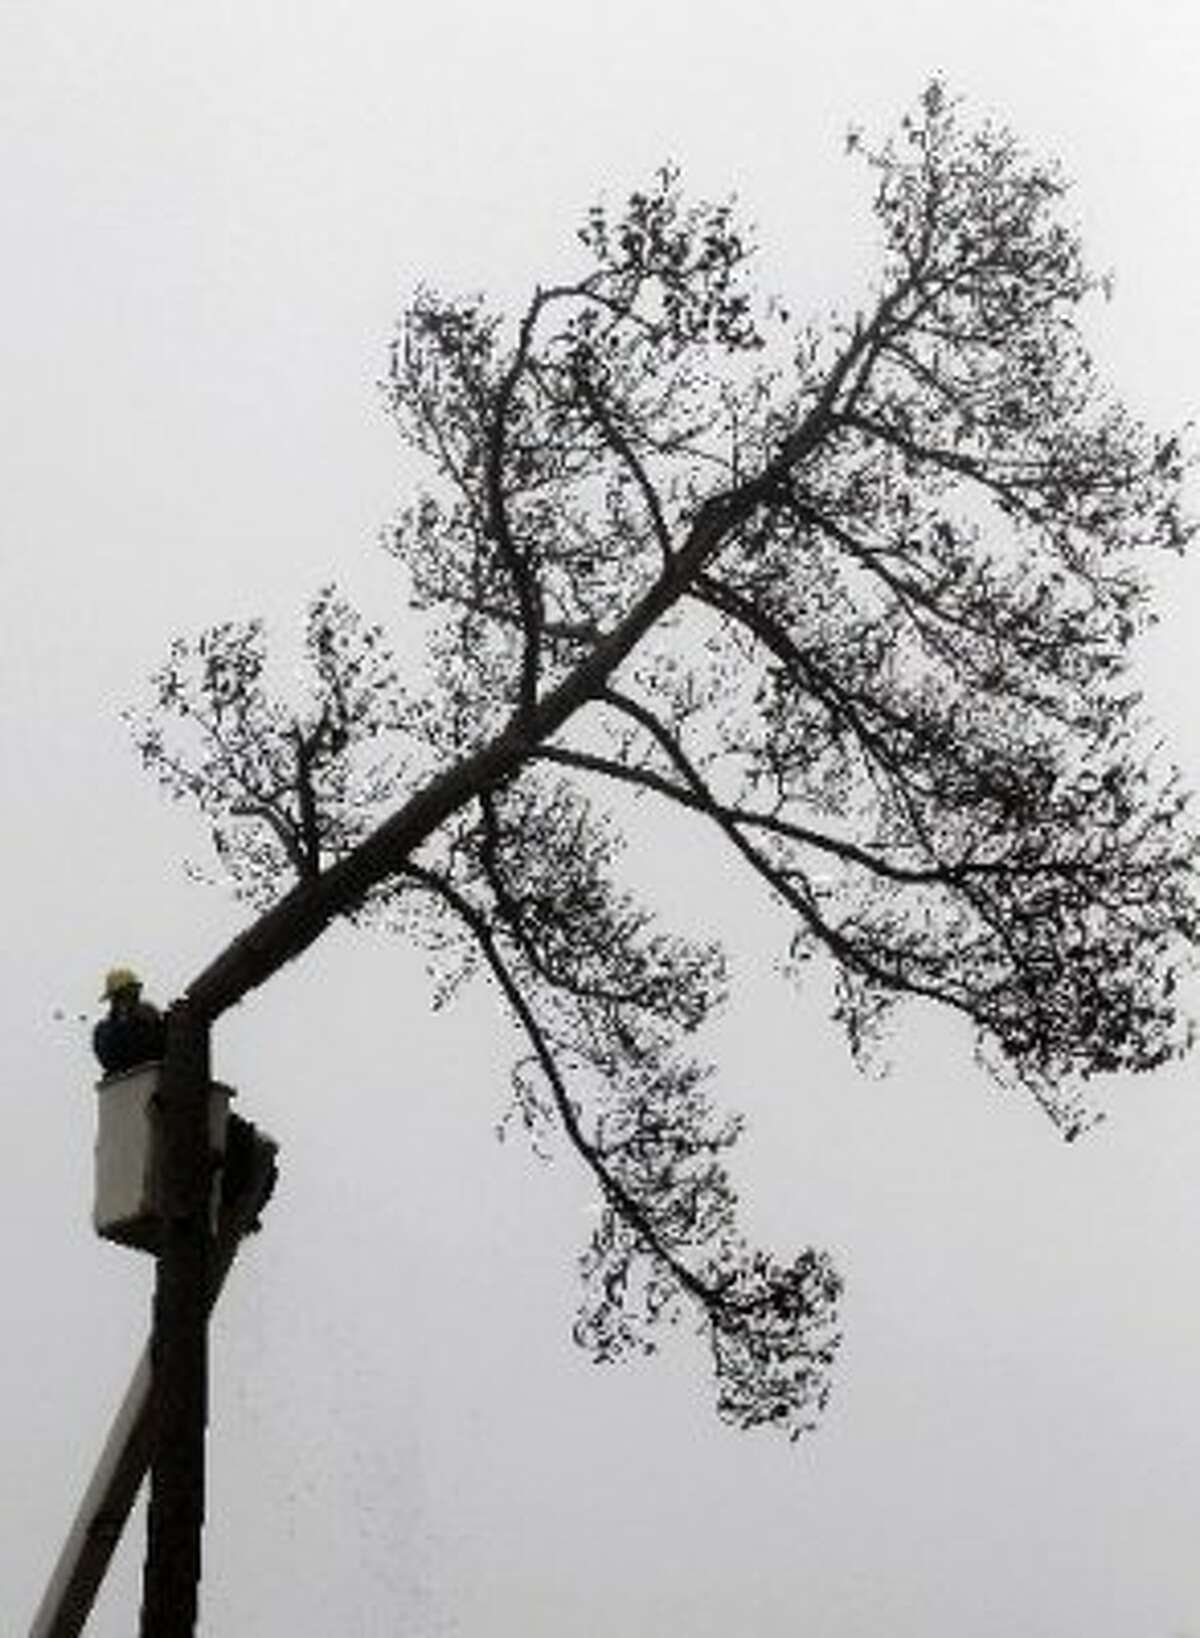 Omar Araujo cuts down a dead tree at Meyer in the morning fog Thursday, Dec. 29, 2011, in Houston. More than 1,800 dead trees are being removed from the park due to the ongoing drought. (David J. Phillip / AP)